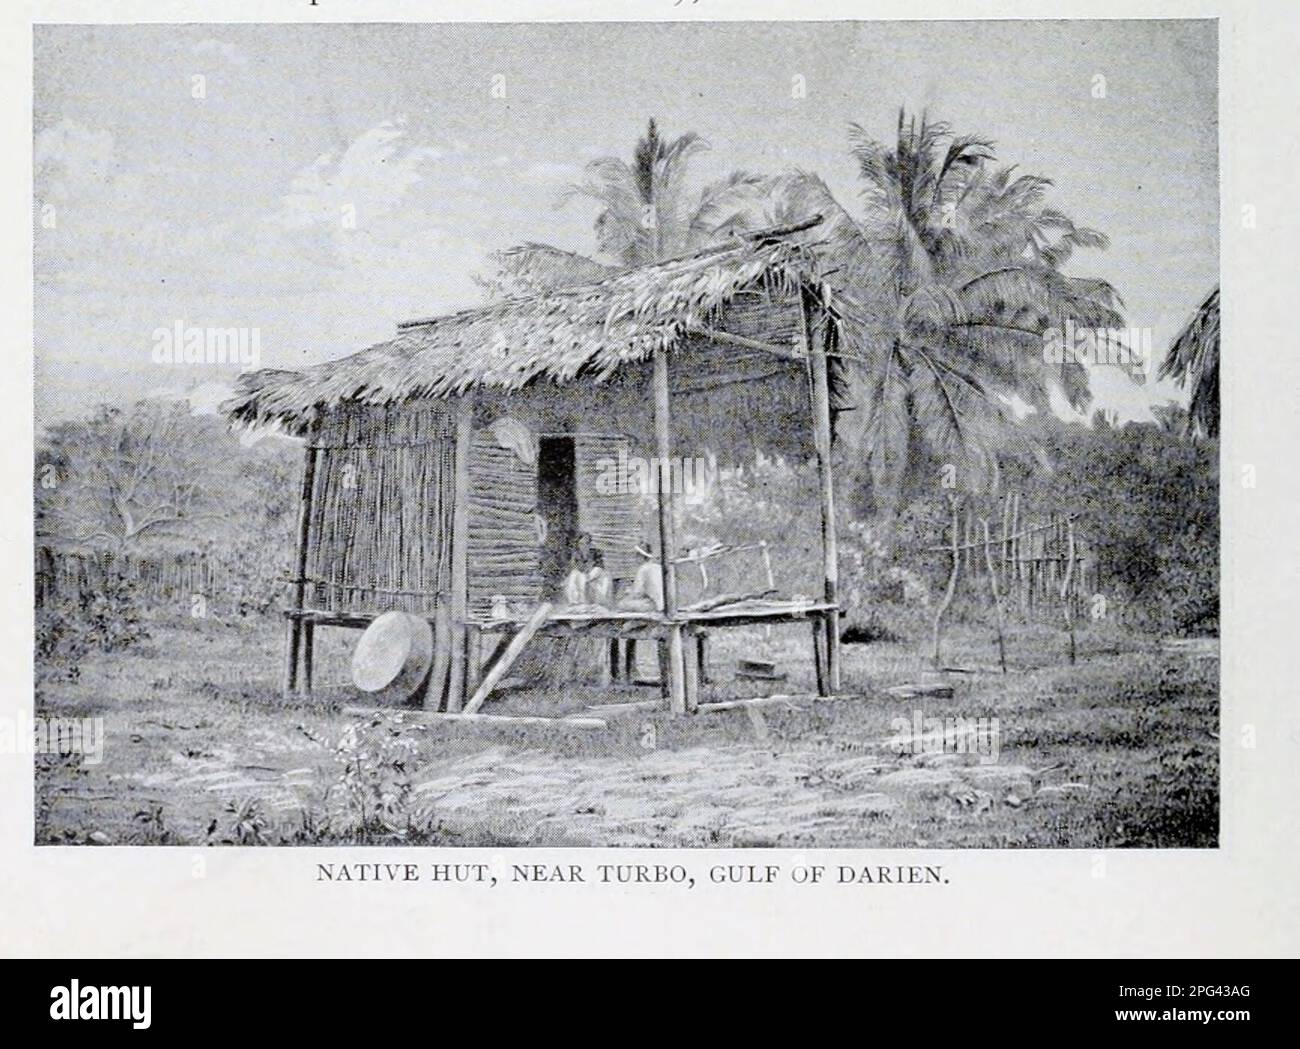 Native hut, near Turbo, Golf of Darien from the Article BUSINESS OPPORTUNITIES IN COLOMBIA. By C. F. Z. Caracristi. from The Engineering Magazine DEVOTED TO INDUSTRIAL PROGRESS Volume IX April to September, 1895 NEW YORK The Engineering Magazine Co Stock Photo